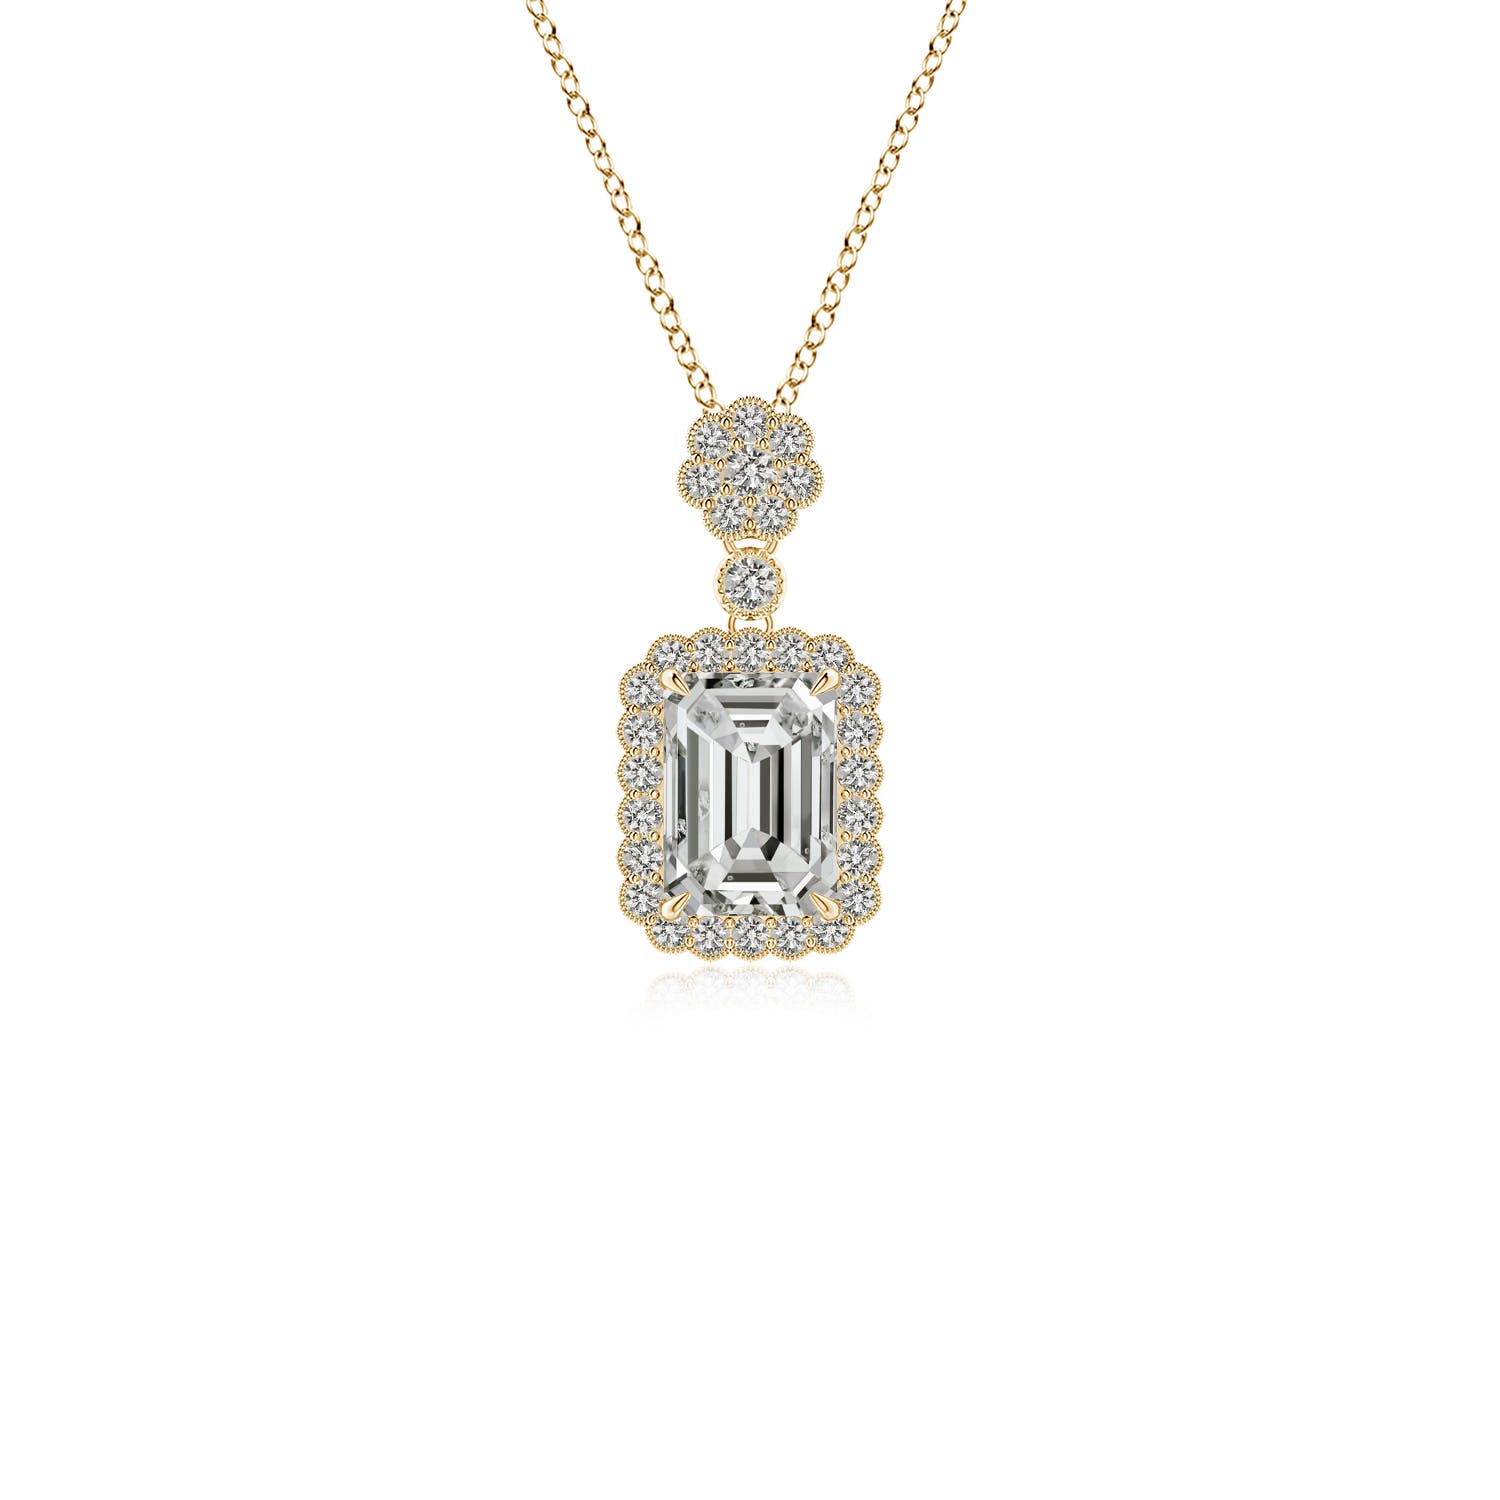 K, I3 / 1.37 CT / 14 KT Yellow Gold